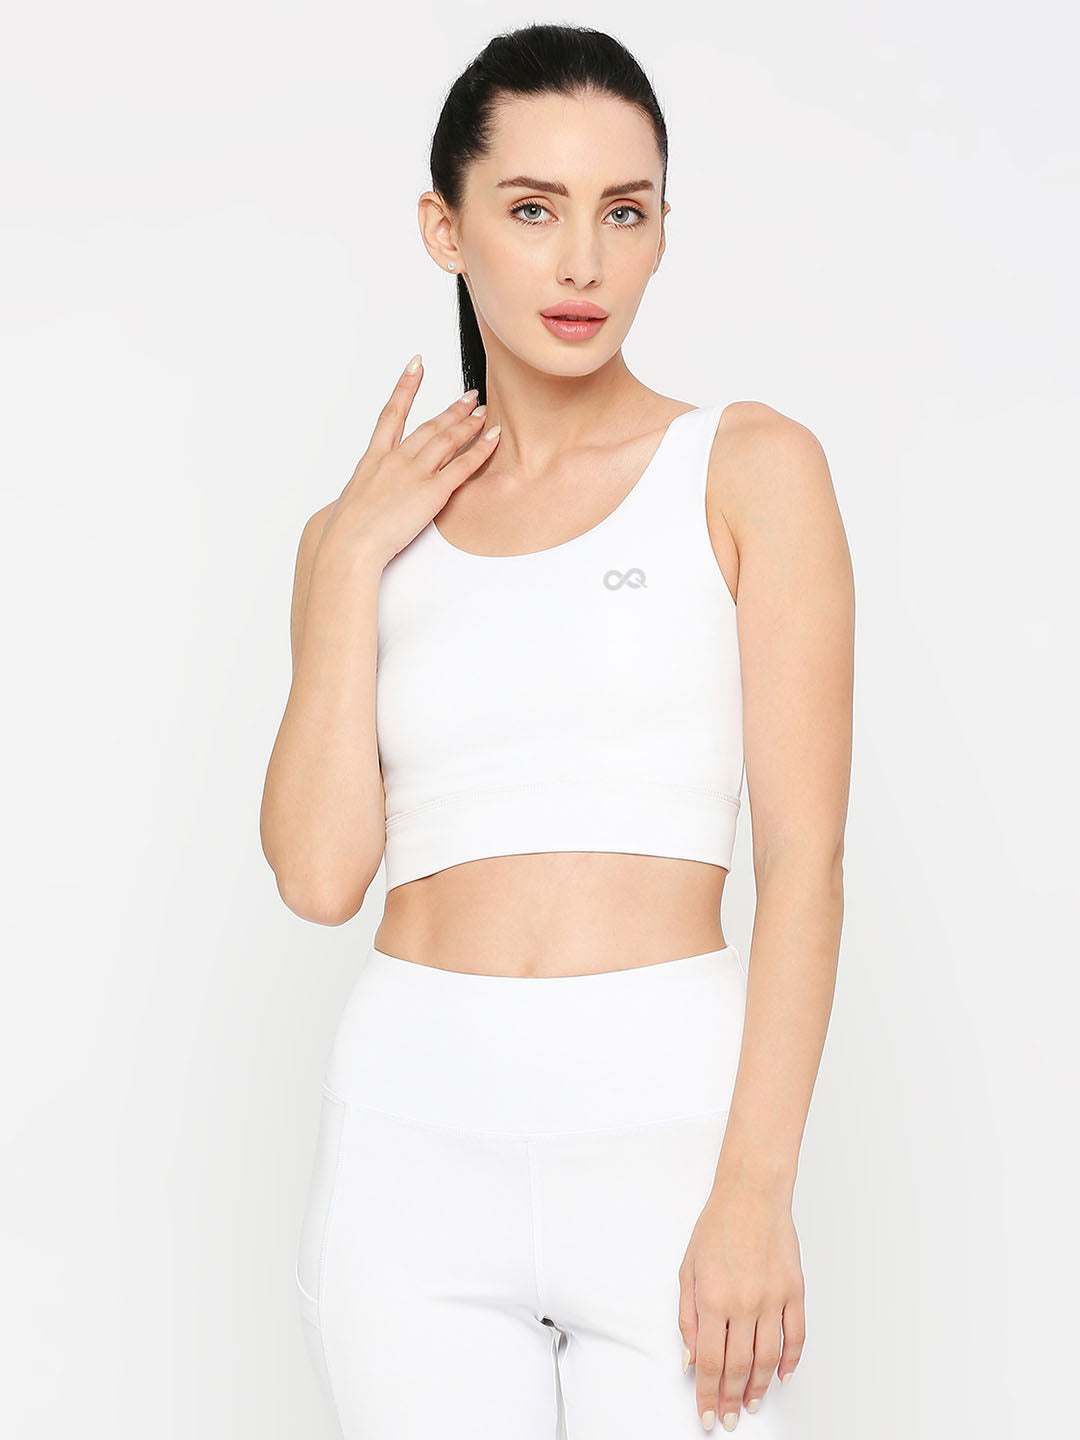 Women's White Sports Bra With Zipper - Stay Supported and Stylish